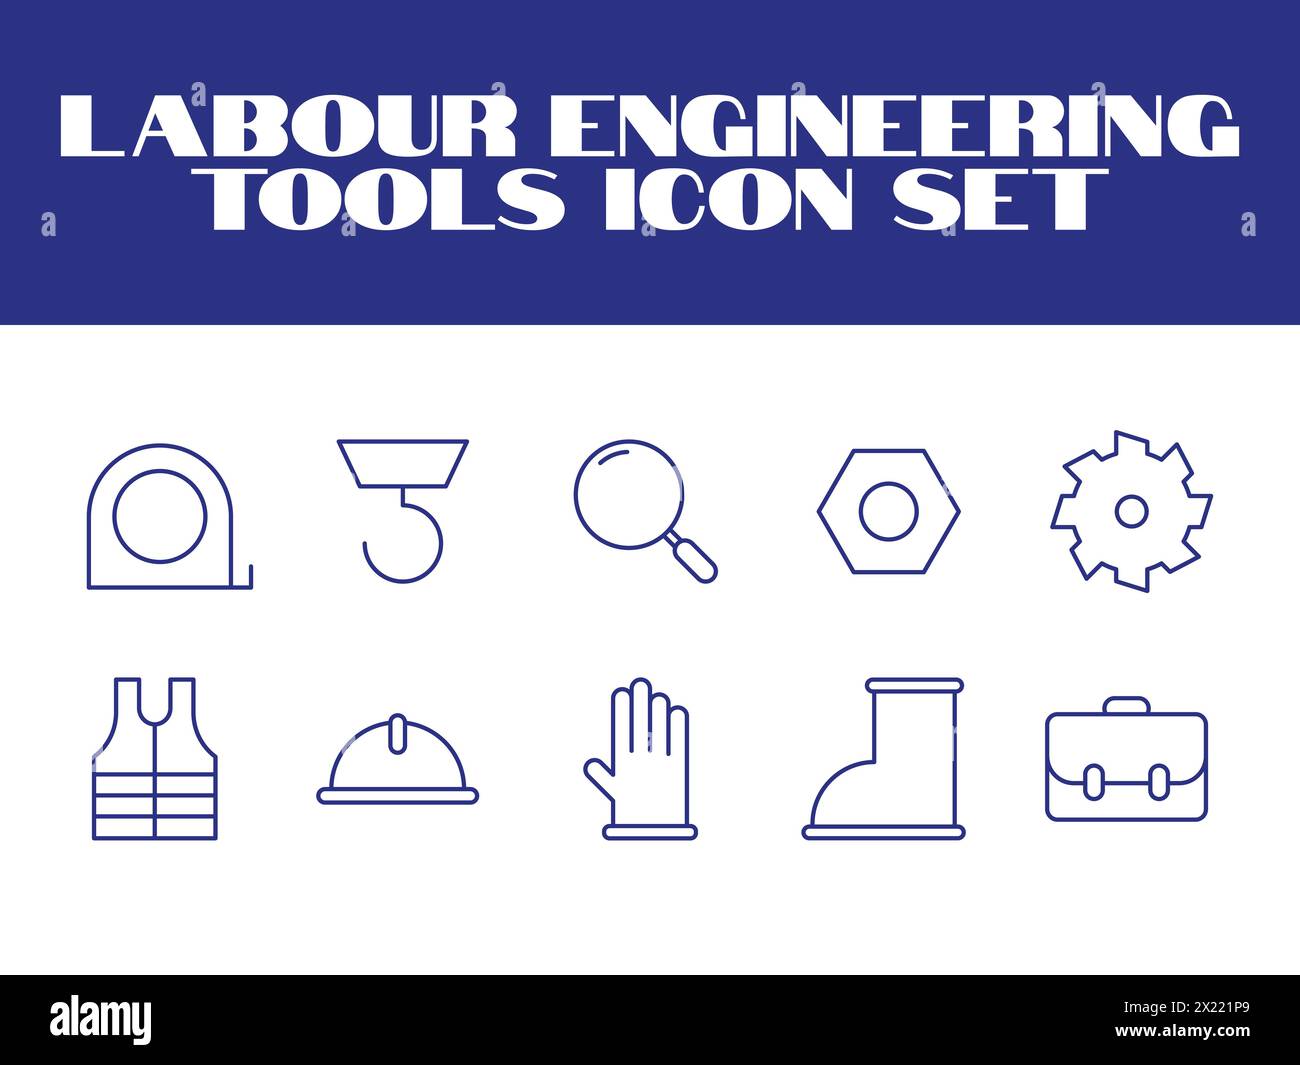 Labour day icon set. Labor Tools Icon Vector graphic illustration. Line Icons set of Engineering tools Stock Vector